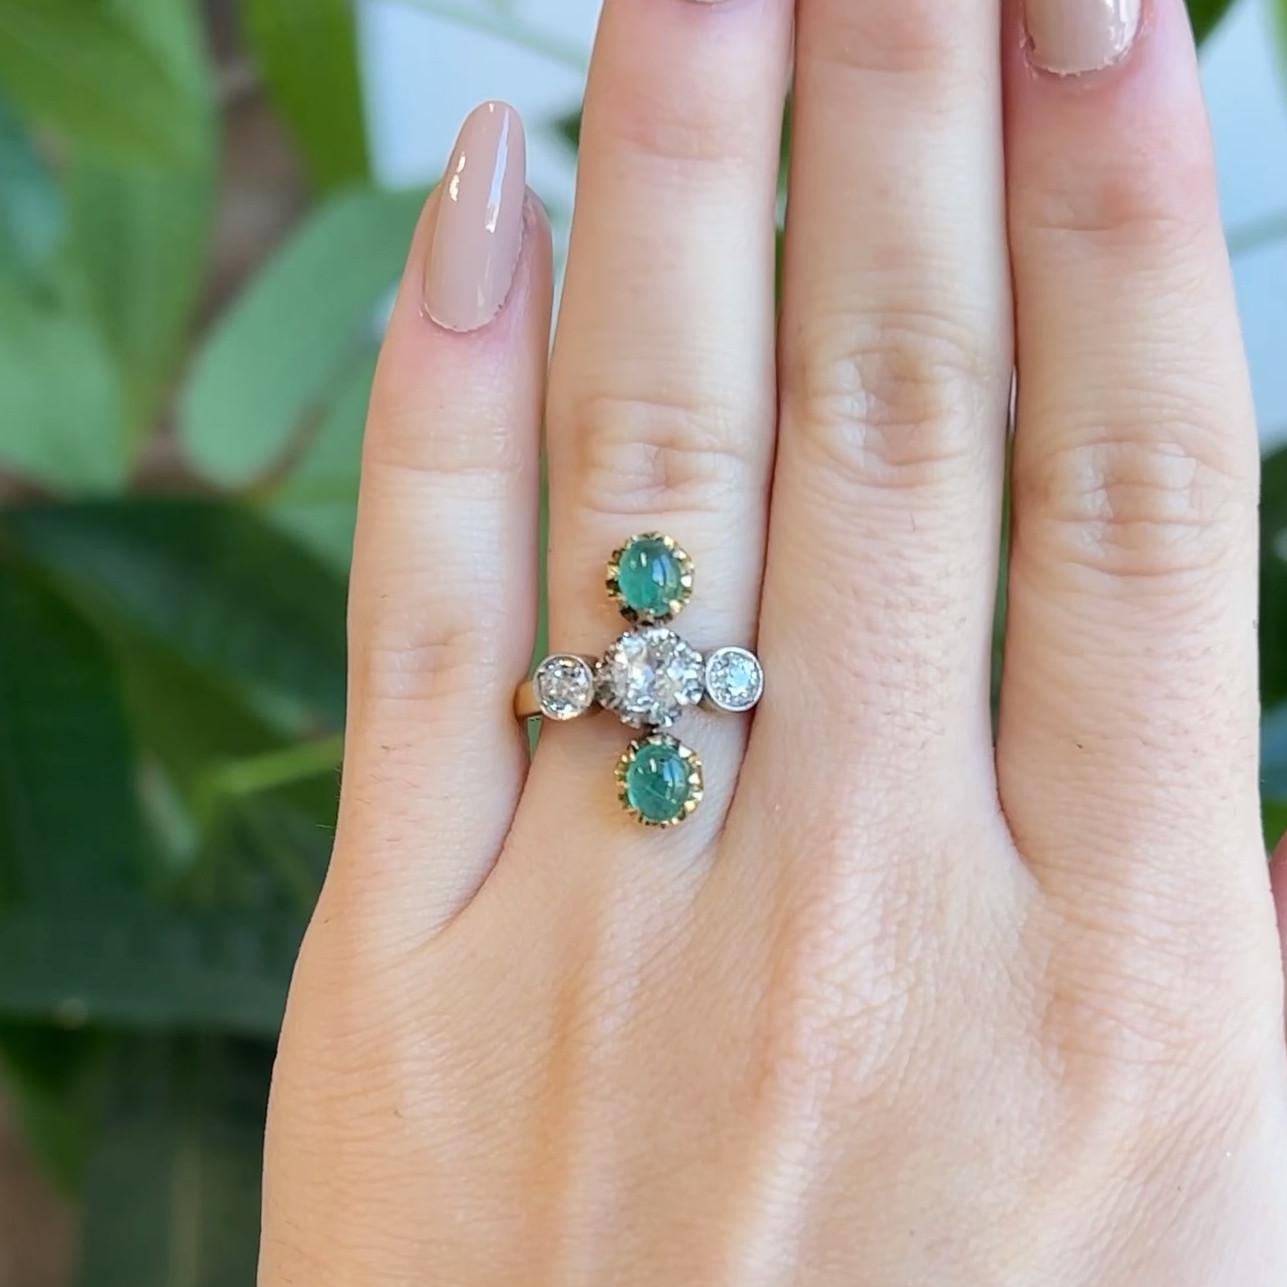 One Antique French Old Mine Cut Diamond Emerald 18 Karat Yellow Gold Ring. Featuring one old mine cut diamond of approximately 0.40 carats, graded in the mounting as J color, SI clarity. Accented by two old European cut diamonds with a total weight